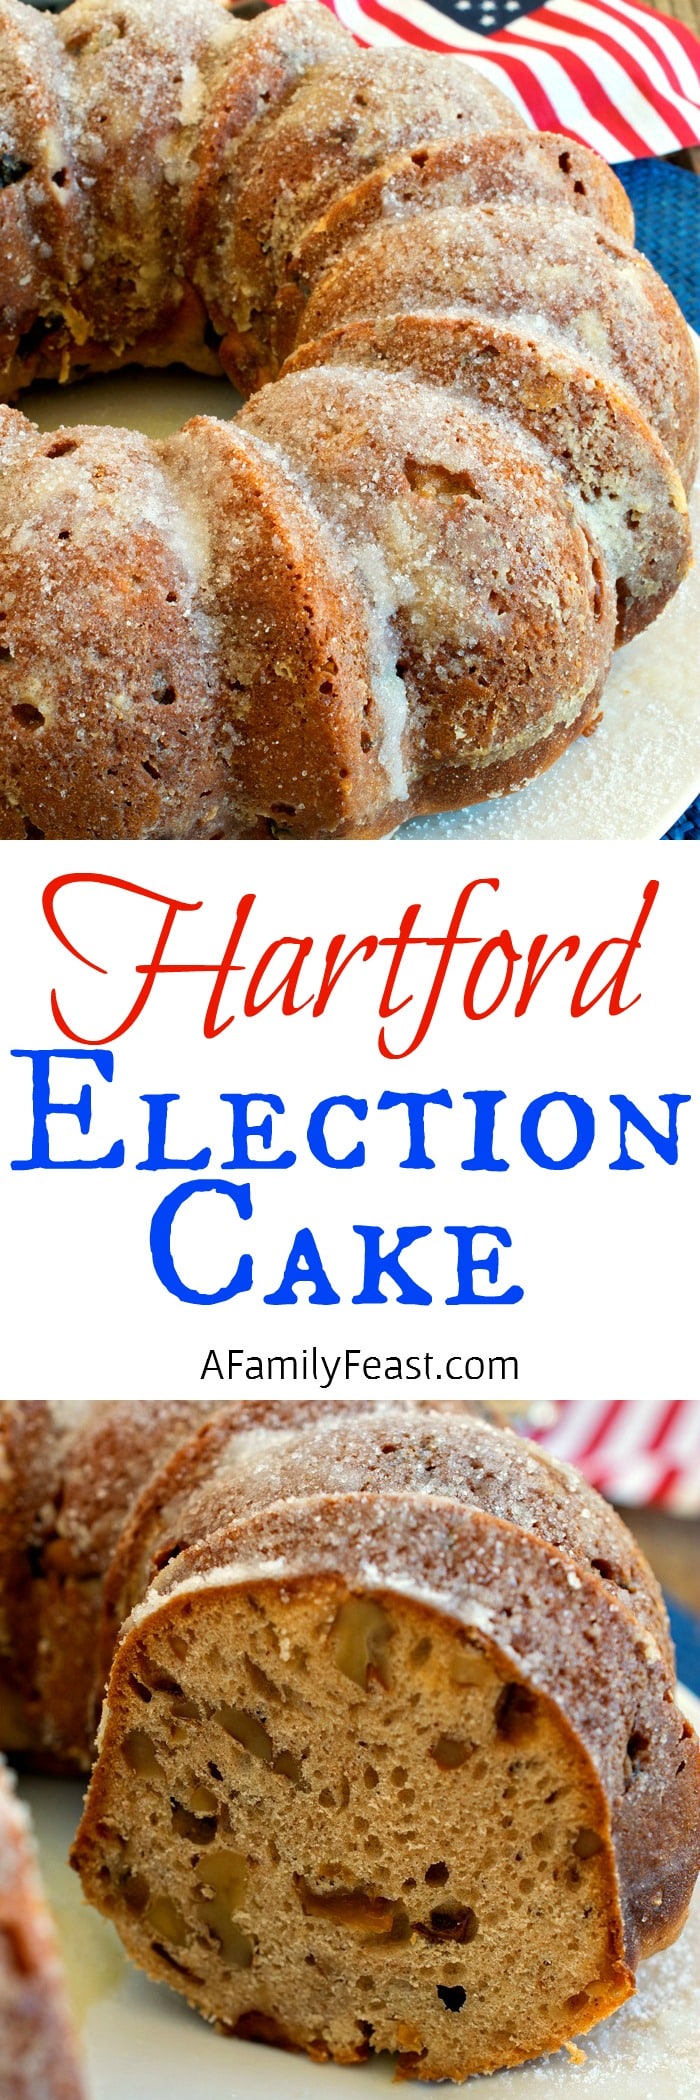 Hartford Election Cake - A vintage recipe with American history! Lightly sweet cake filled with nuts and dried fruit and frosted with sugar.